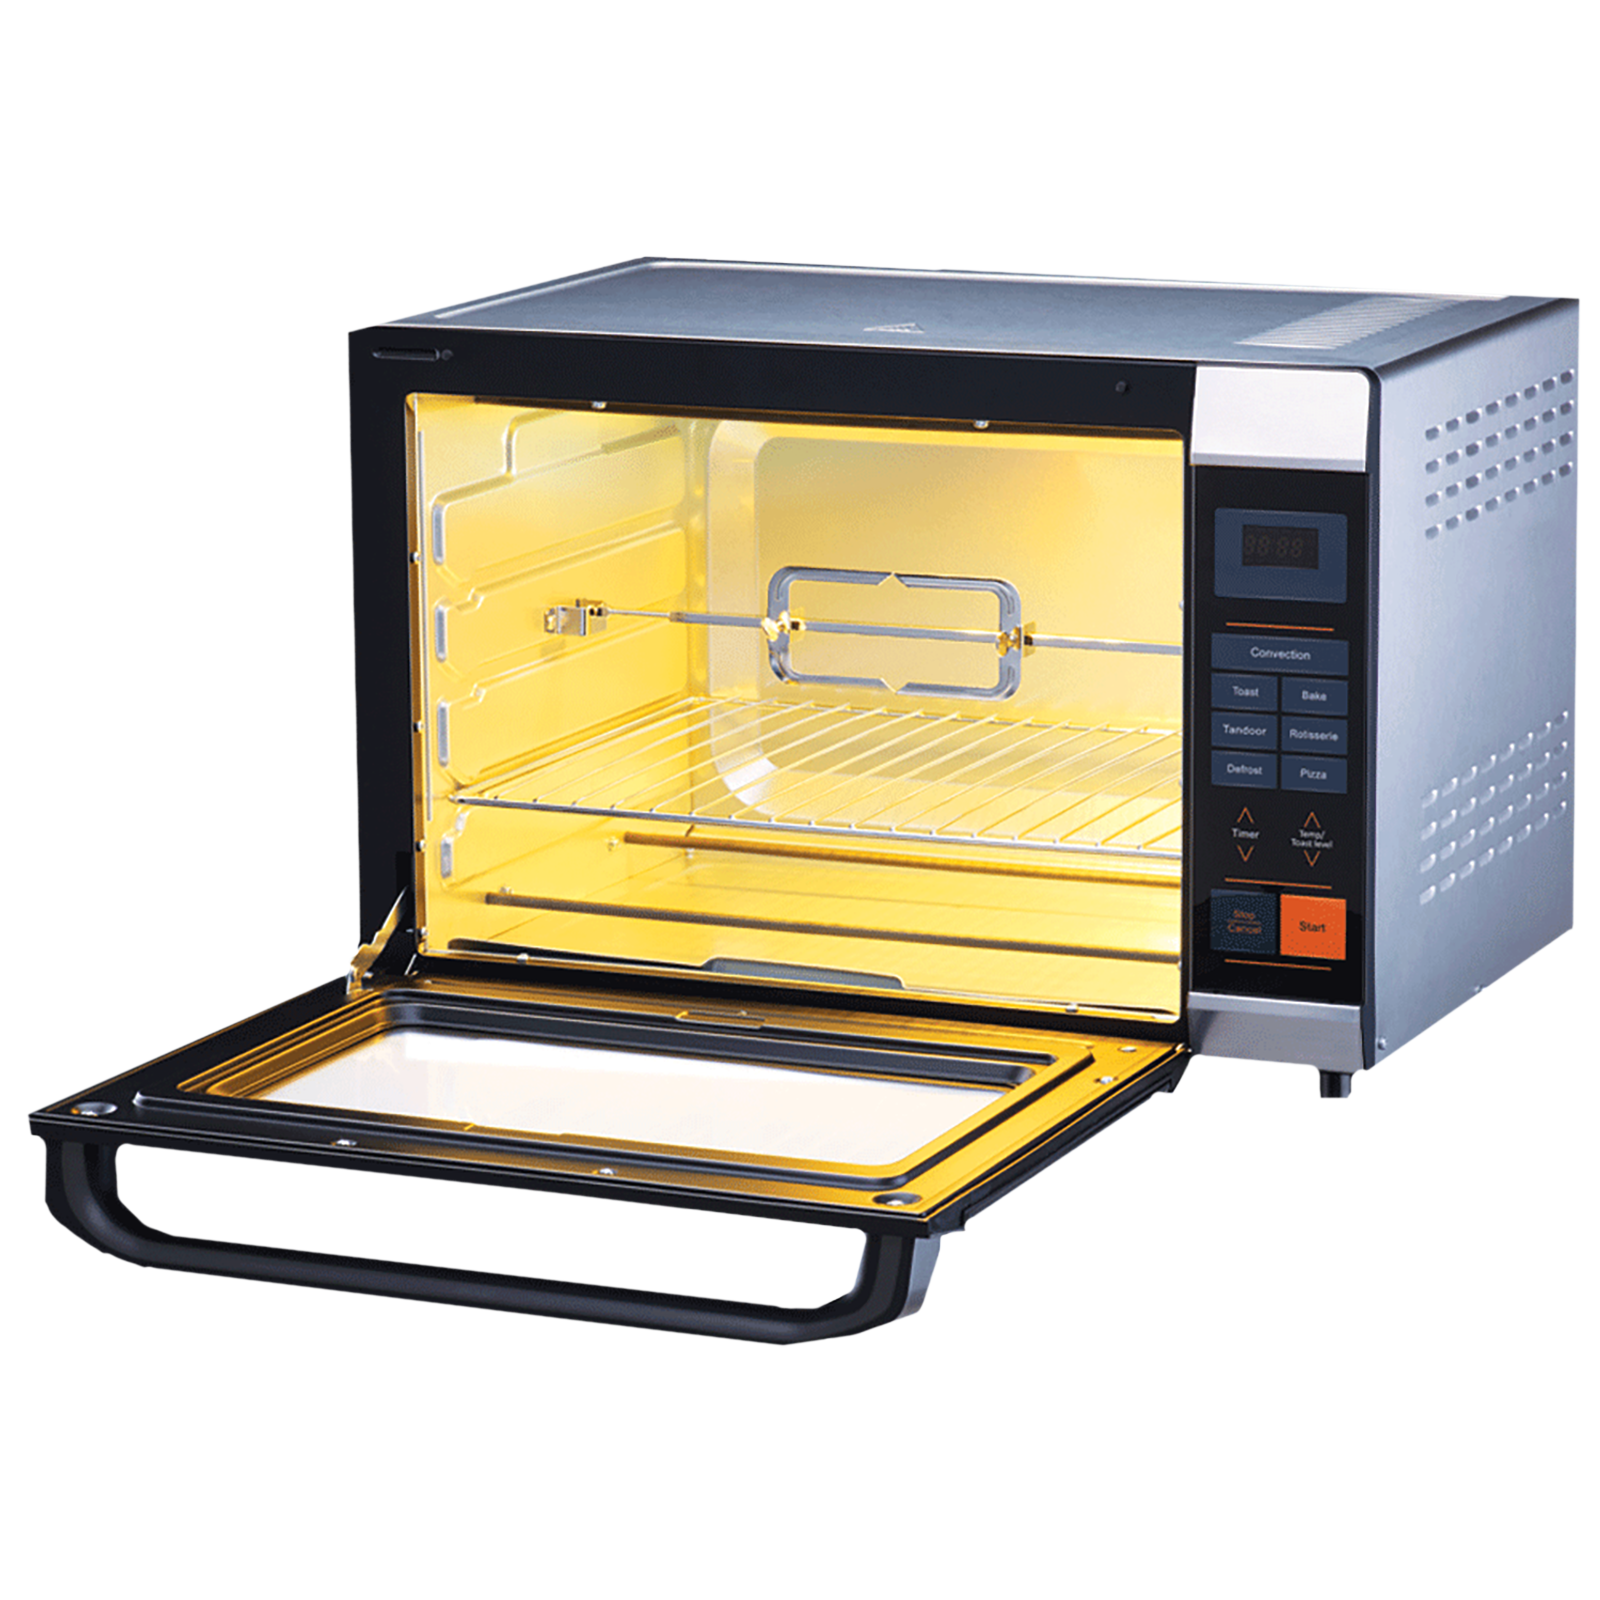 How to use Bajaj OTG Oven.. The abbreviation for OTG is Oven… | by Peter  Dsouza | Medium